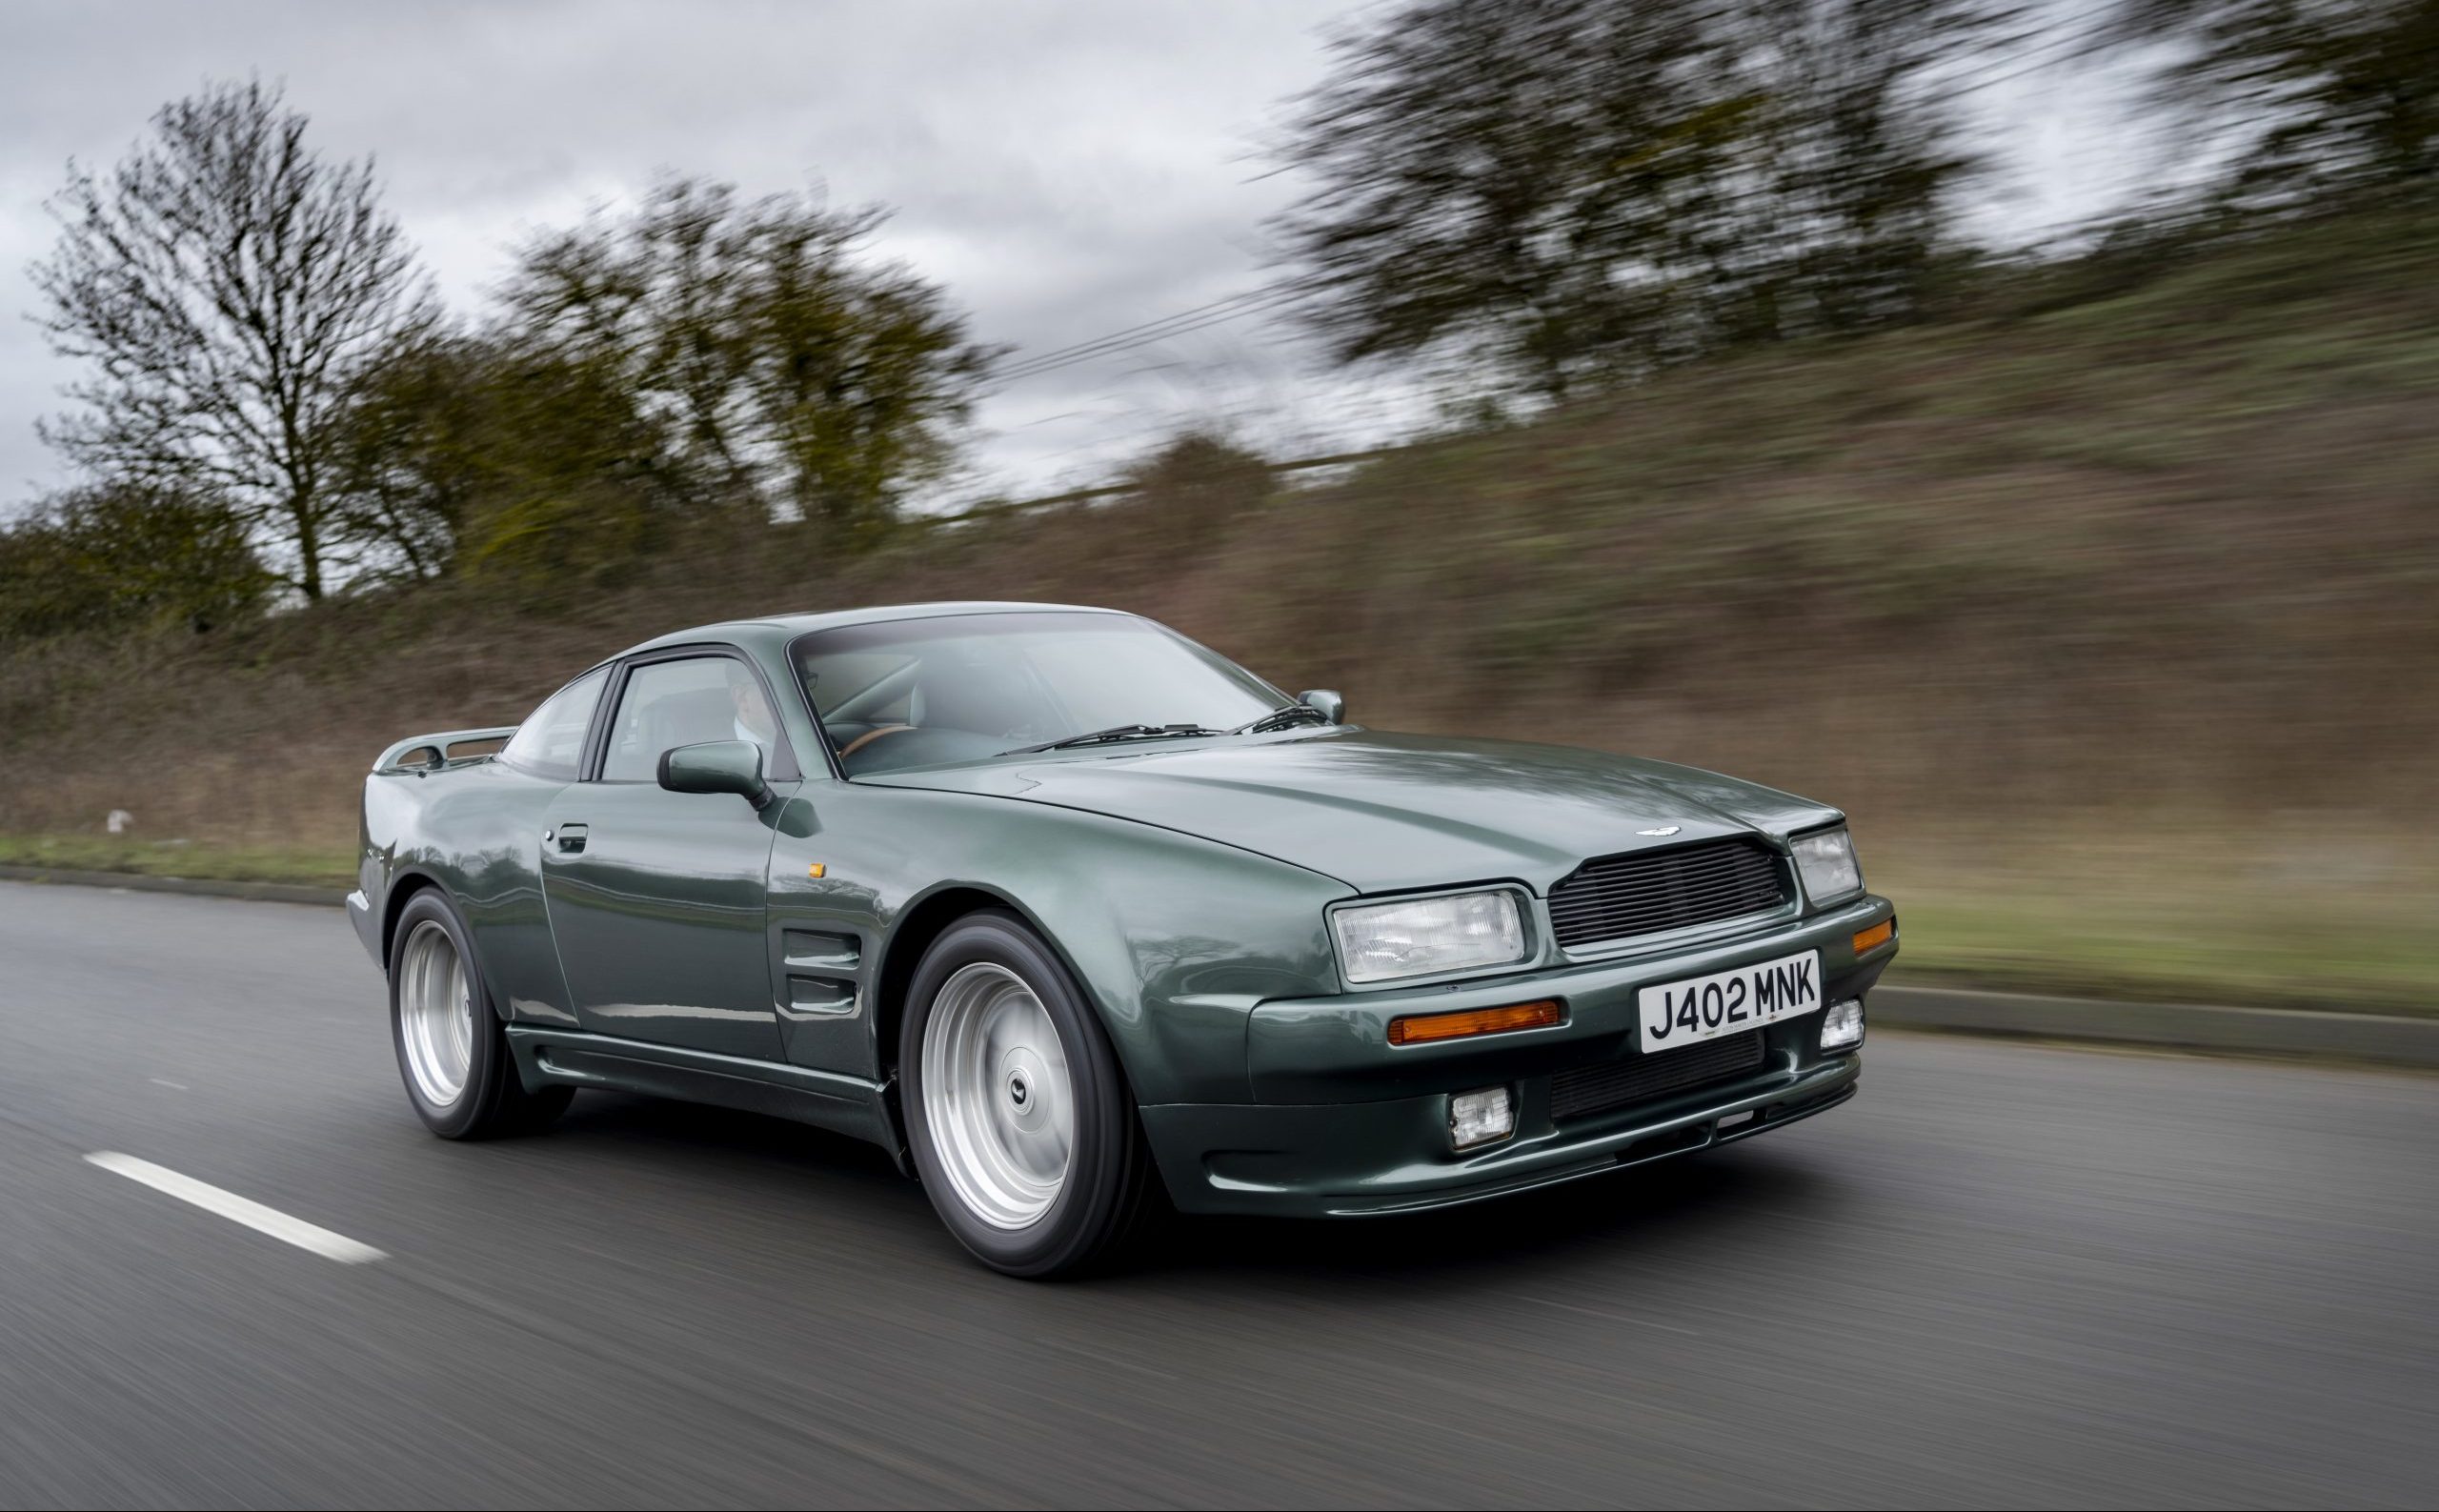 Mighty Minky: After 30 years the Aston Martin Virage 6.3 is still the real deal